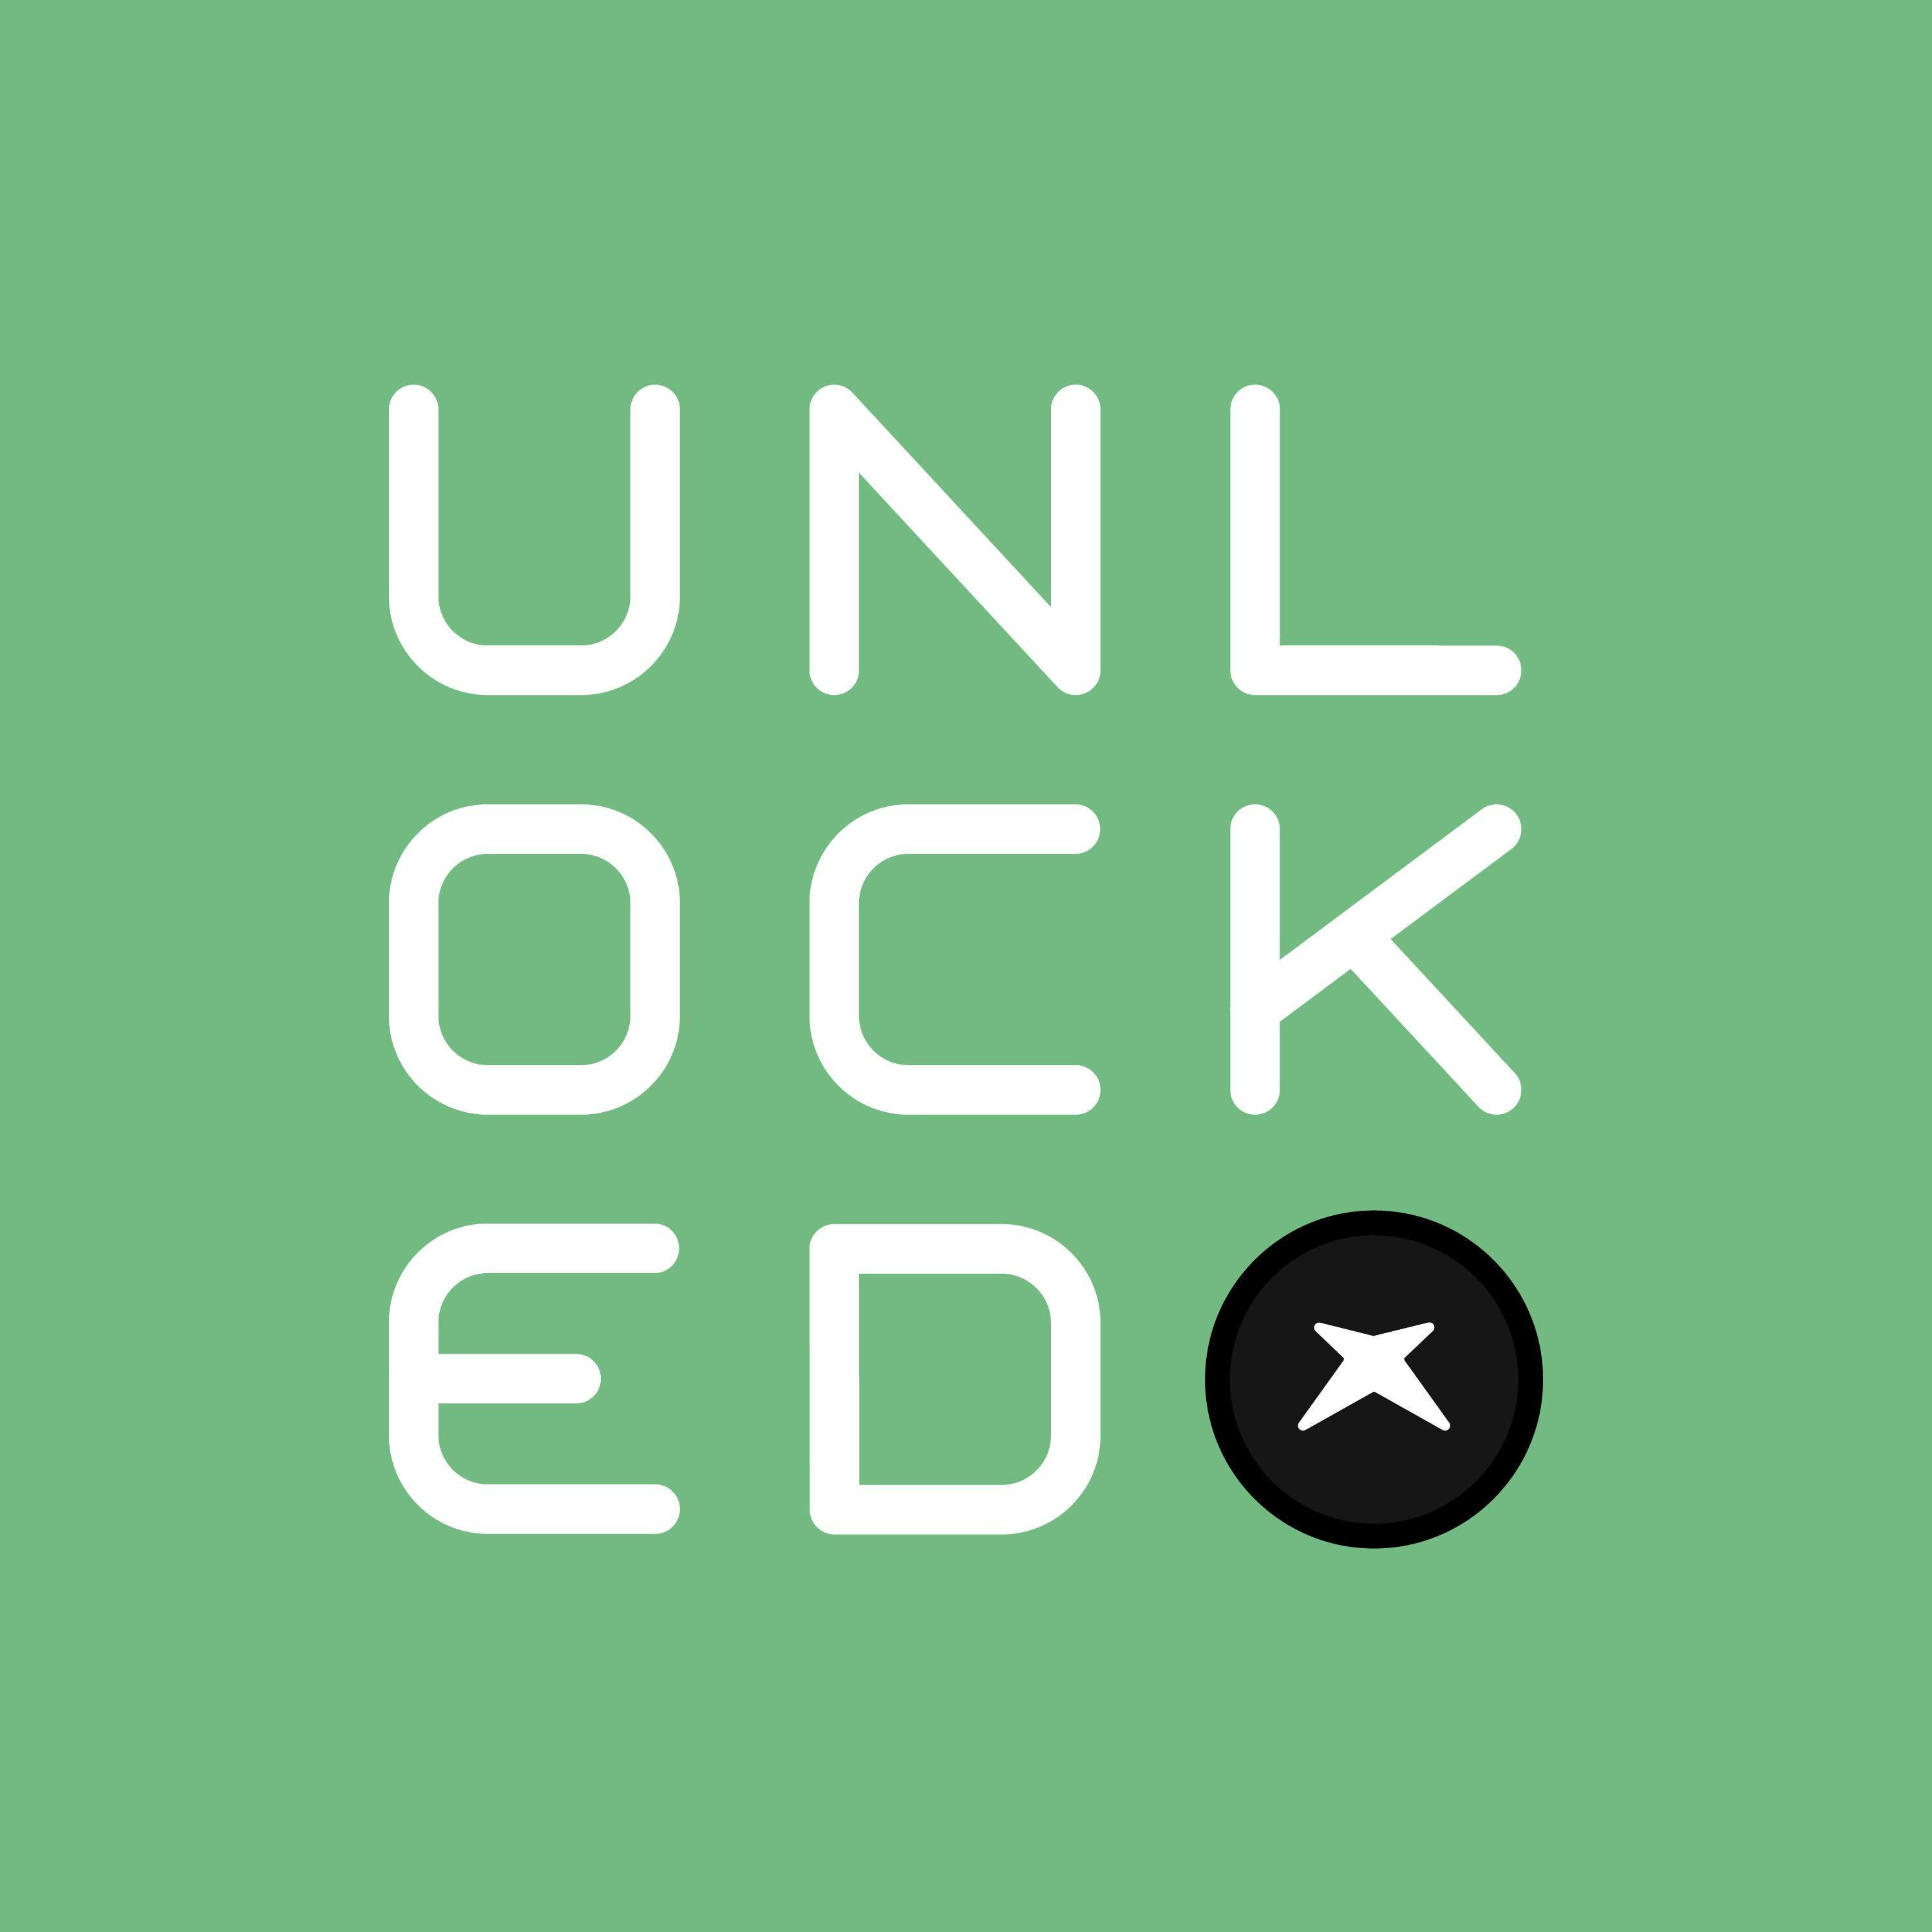 Podcast Unlocked Episode 110: A Goldfarb Appears